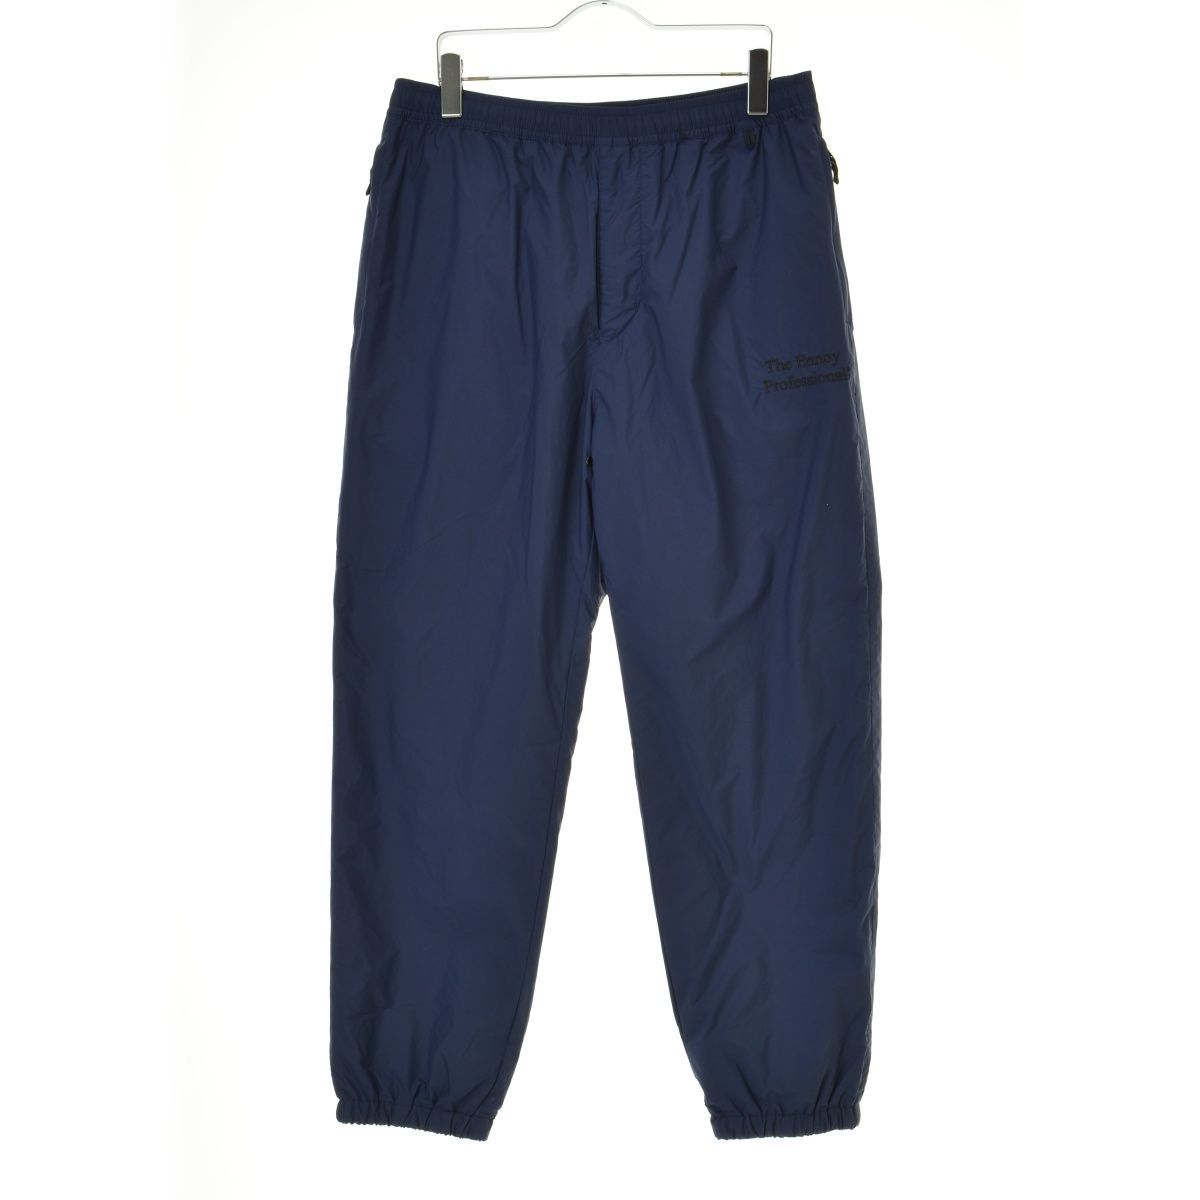 The Ennoy Professional TRACK PANTS L